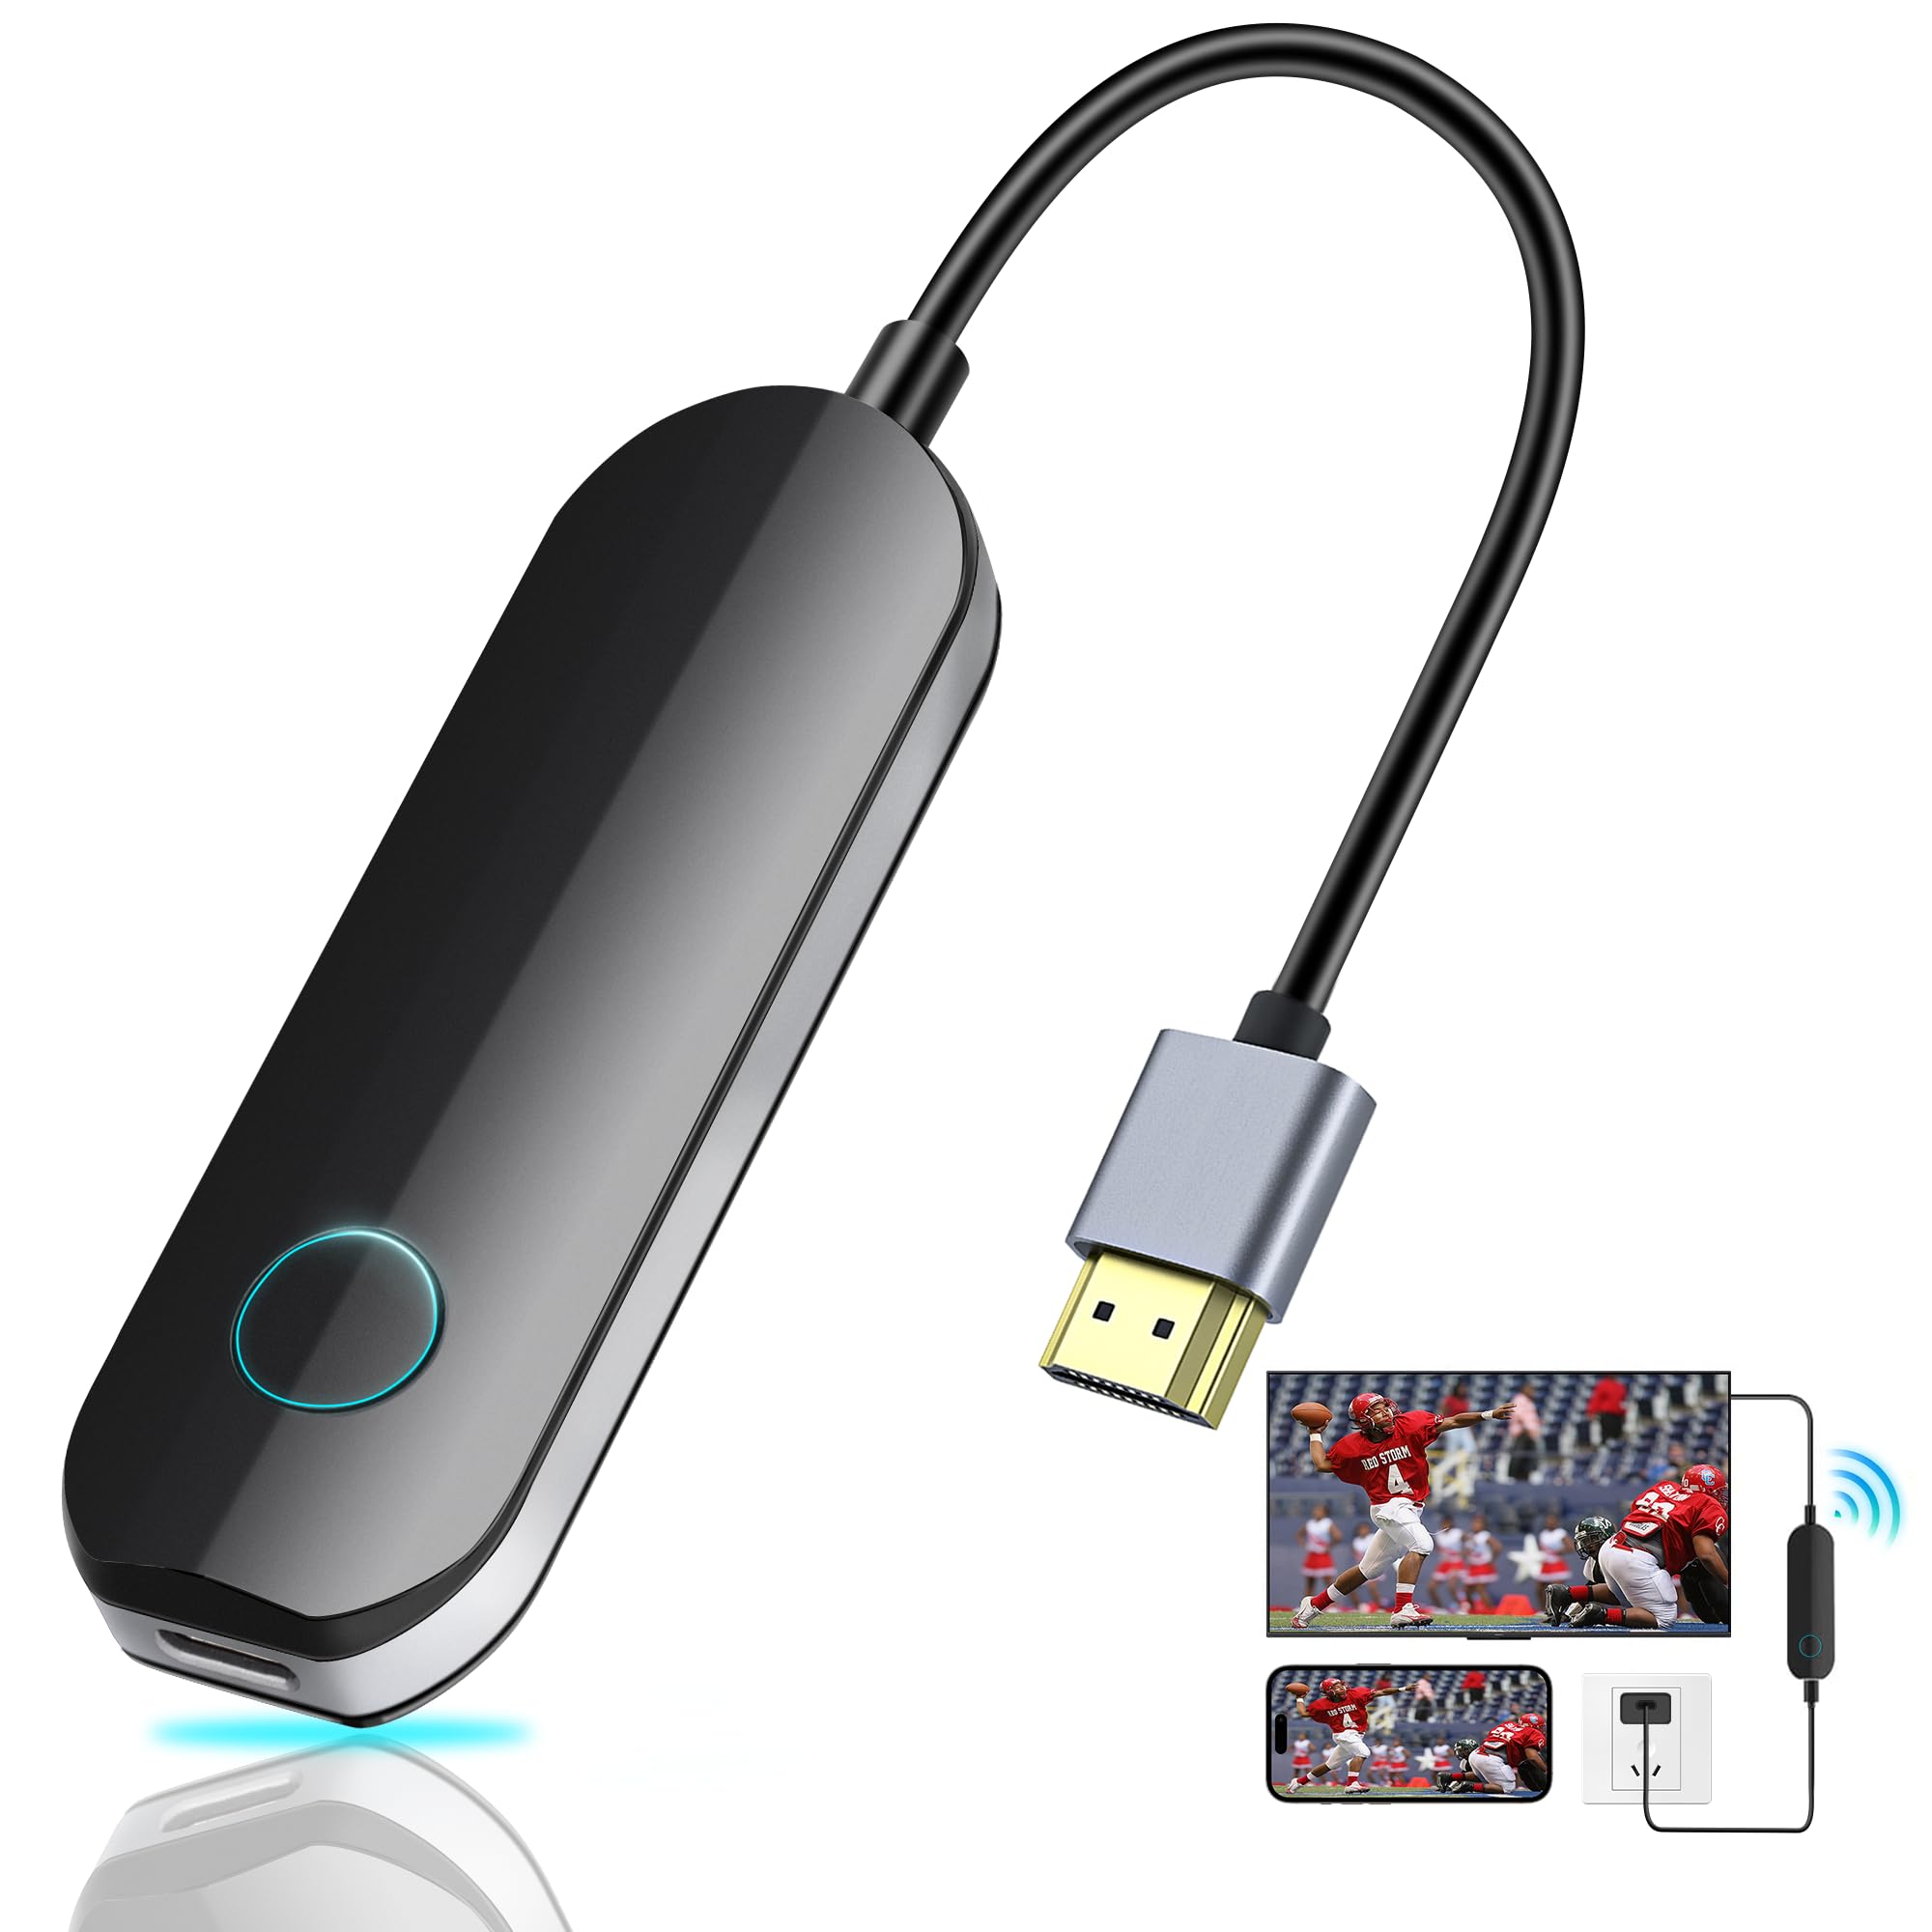 HDMI cable
Wireless display adapter